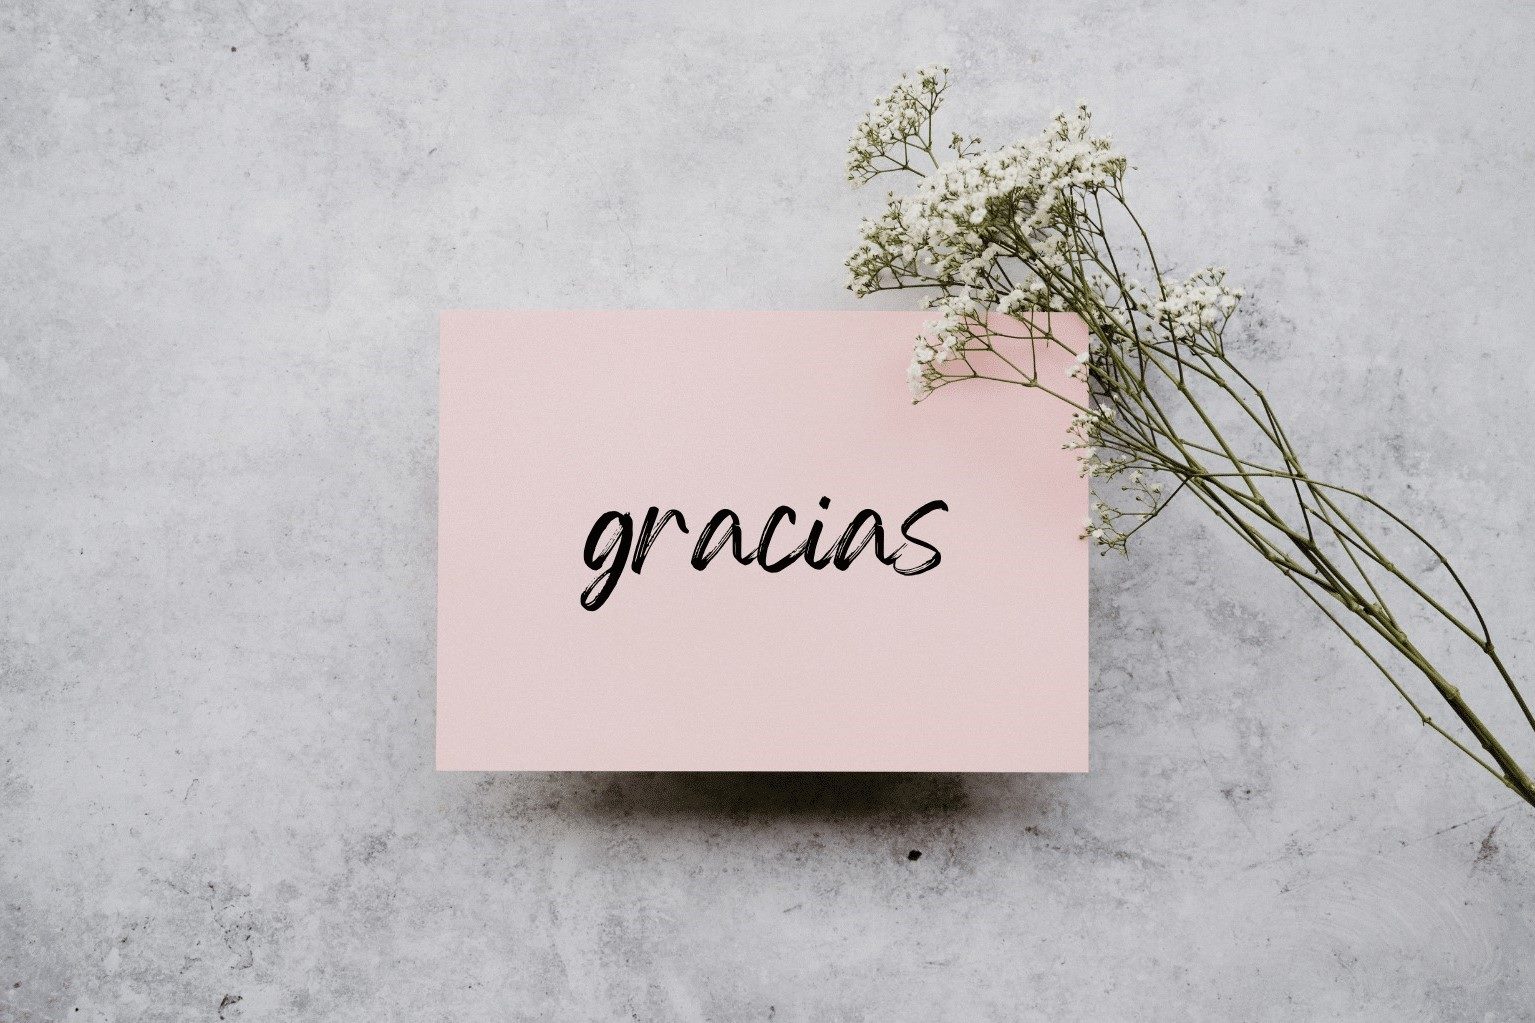 The Correct Way To Say 'Thank You' In Spanish